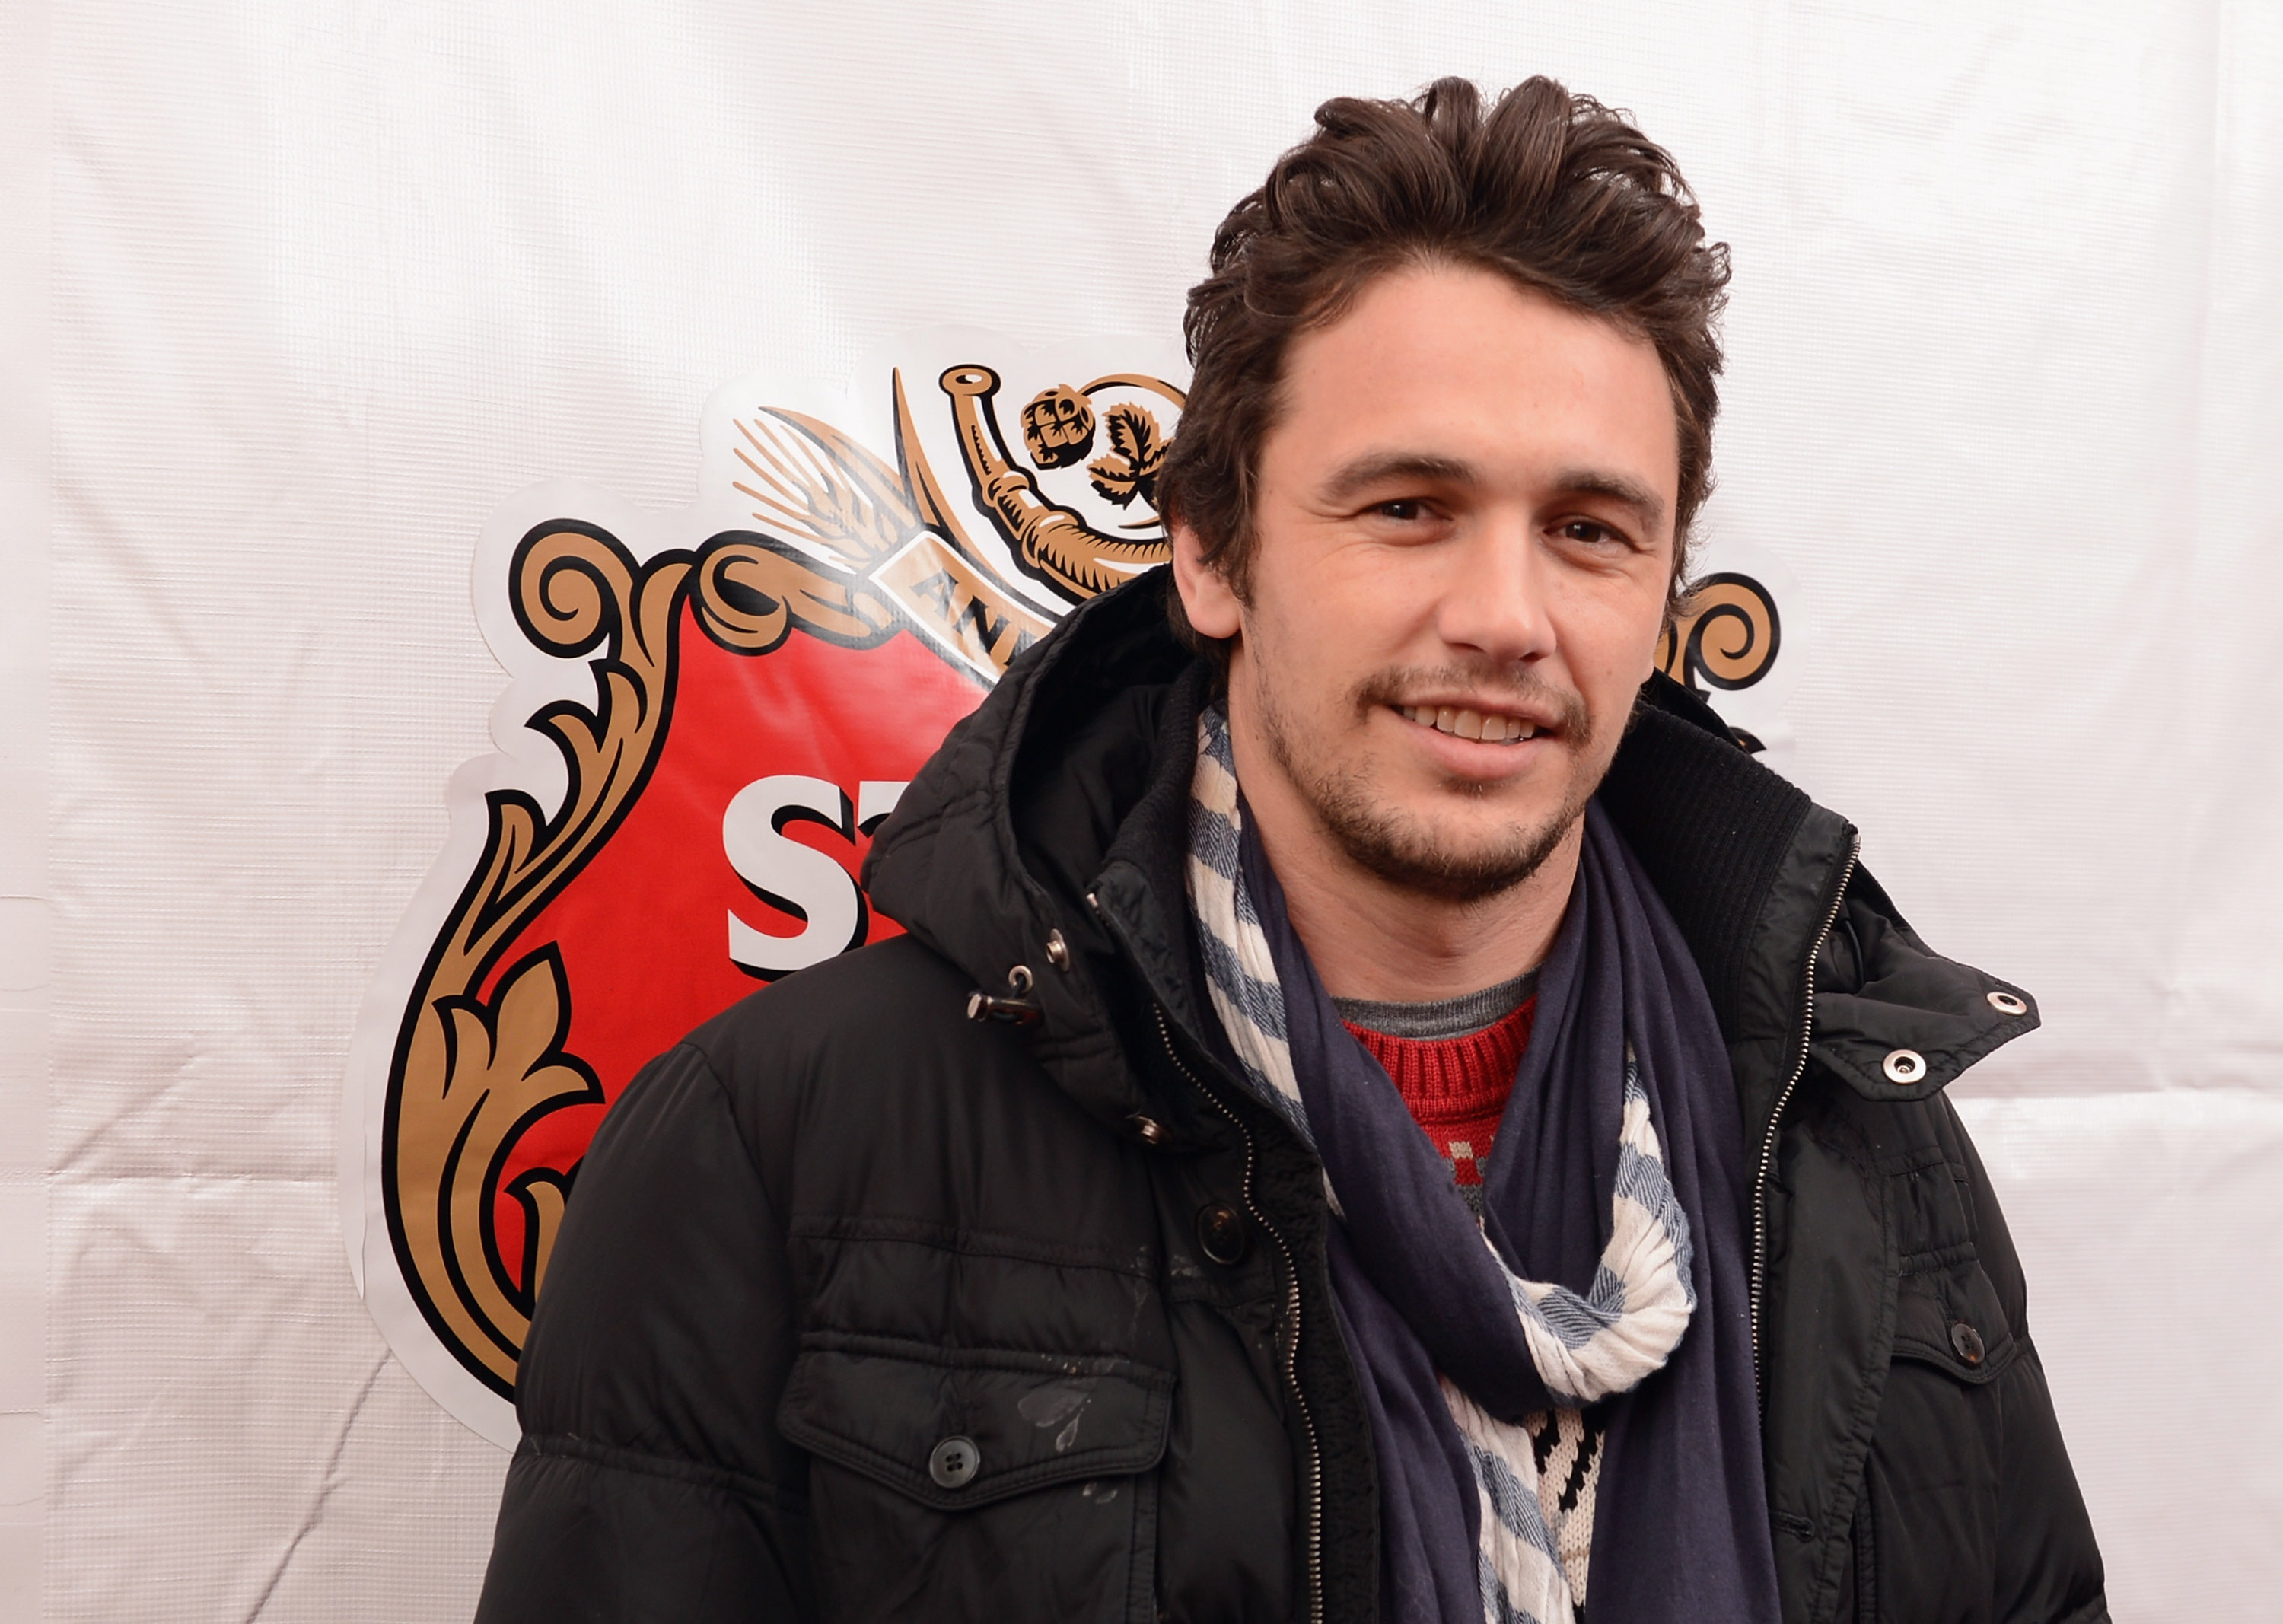 PARK CITY, UT - JANUARY 19:  Actor James Franco attends the press dinner for James Franco hosted by Stella Artois at the Stella Artois Cafe at Village at The Lift on January 19, 2013 in Park City, Utah.  (Photo by Andrew H. Walker/Getty Images for Stella Artois)